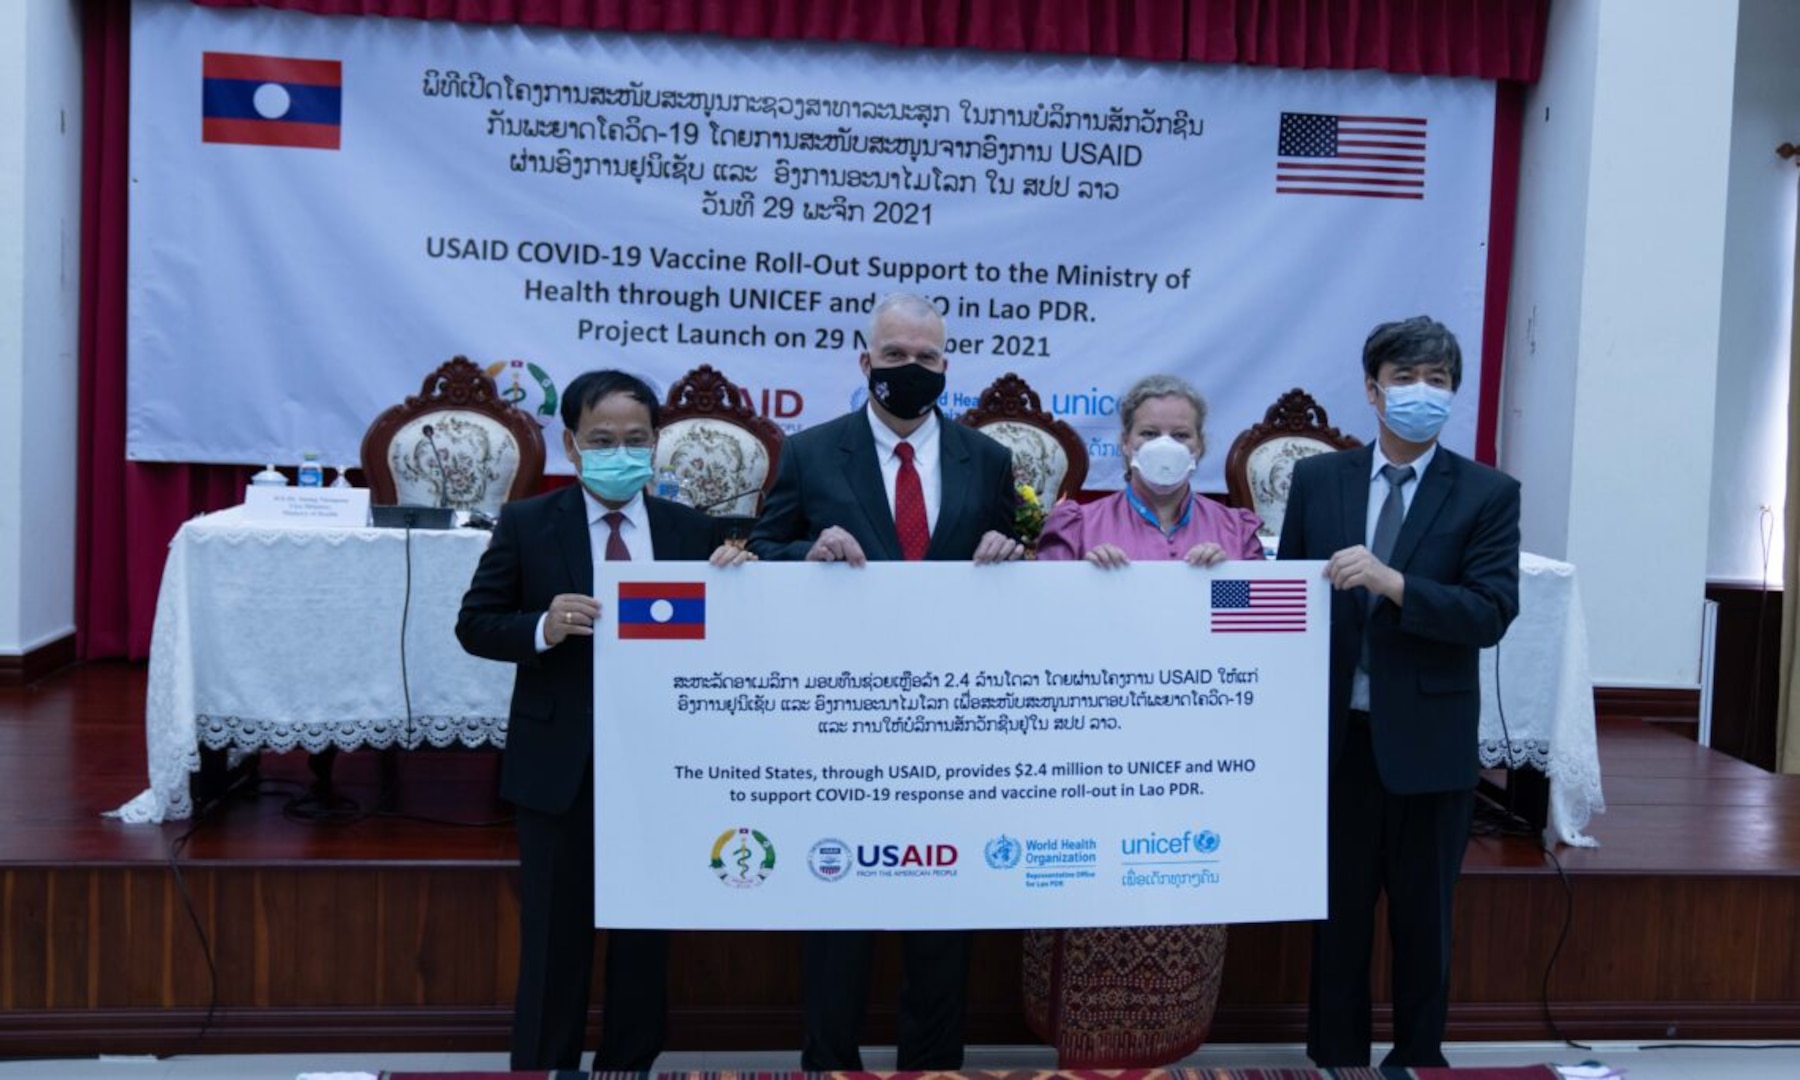 2.4 Million $ to Support COVID-19 Vaccination in Laos